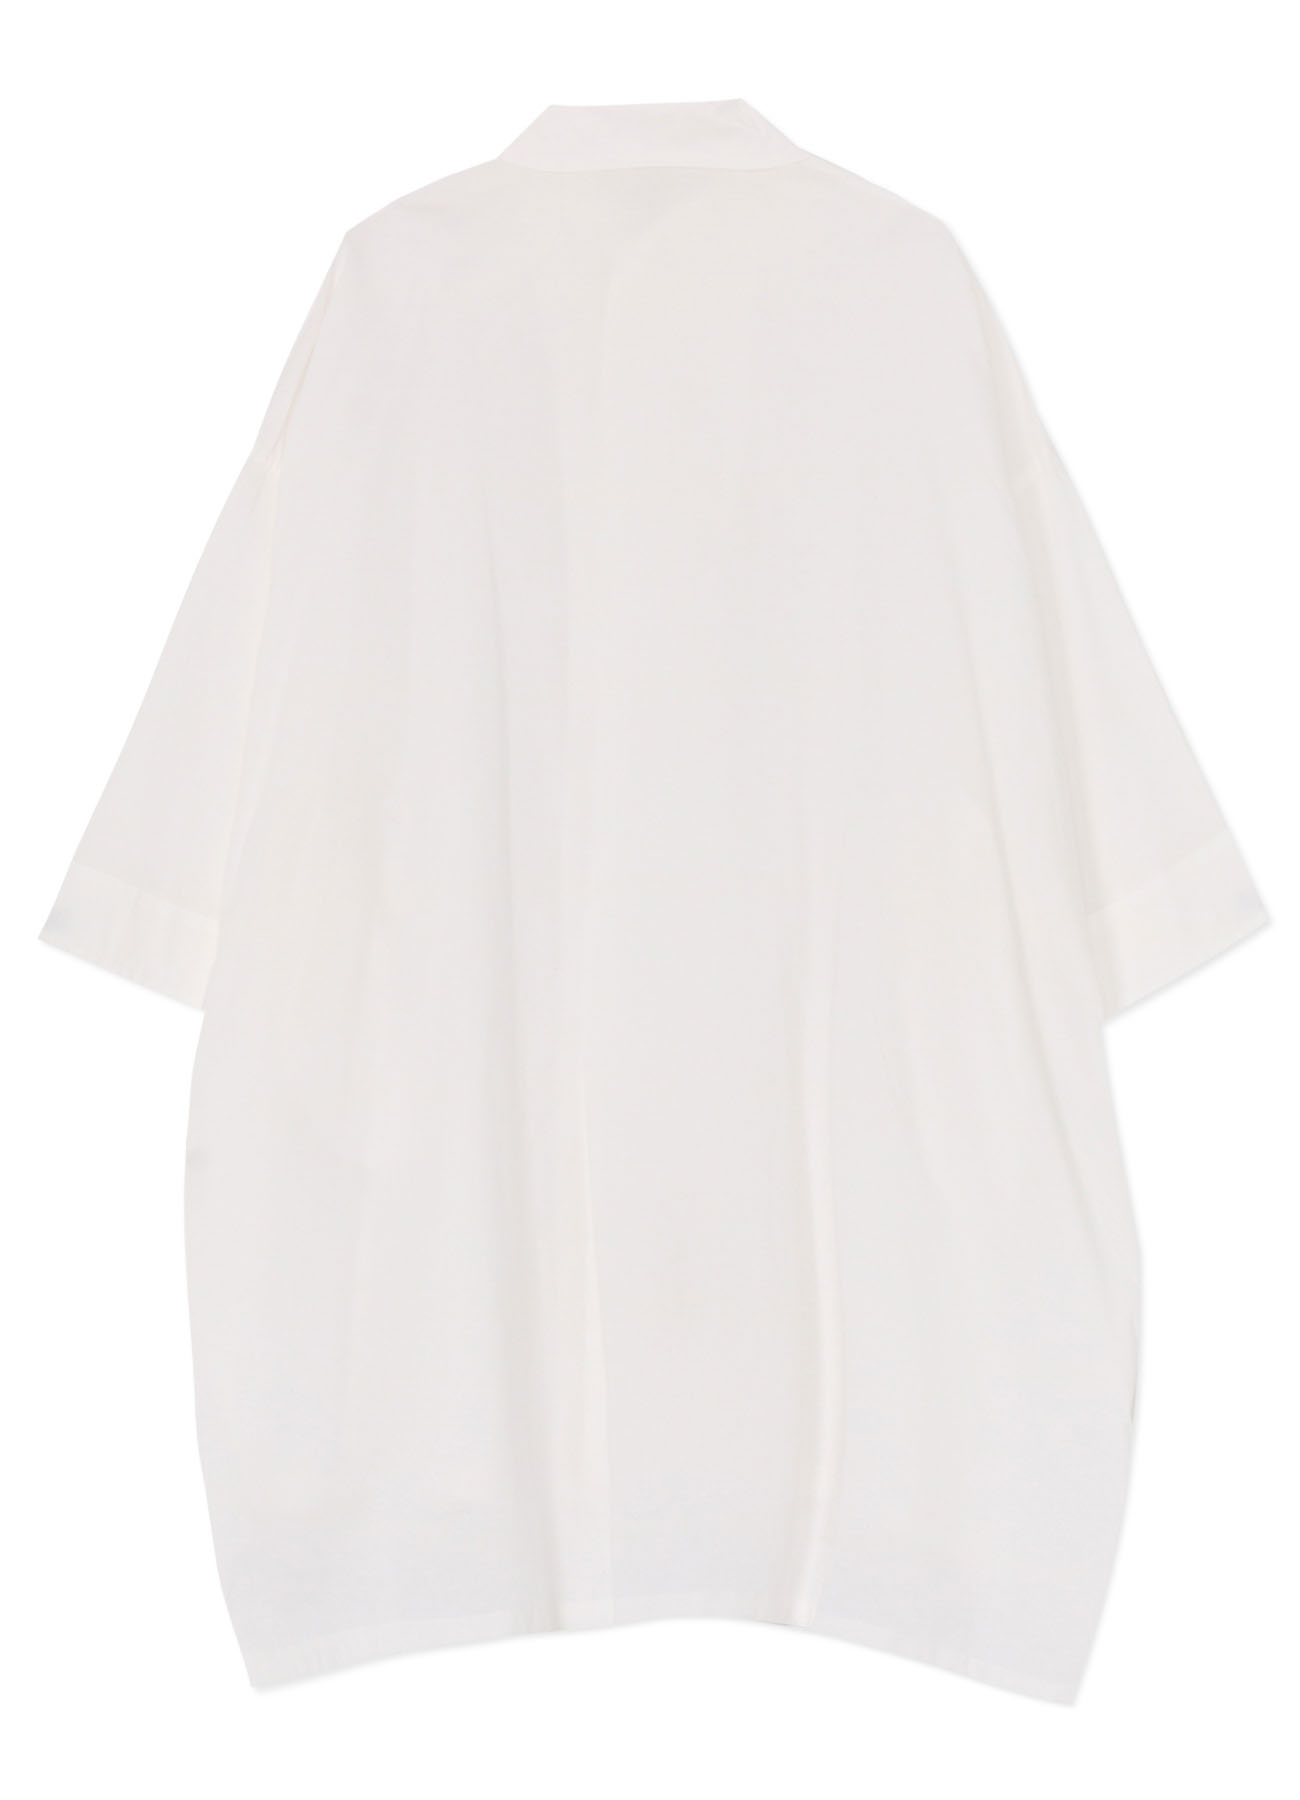 [Y's BORN PRODUCT] THIN COTTON TWILL OVERSIZED DRESS